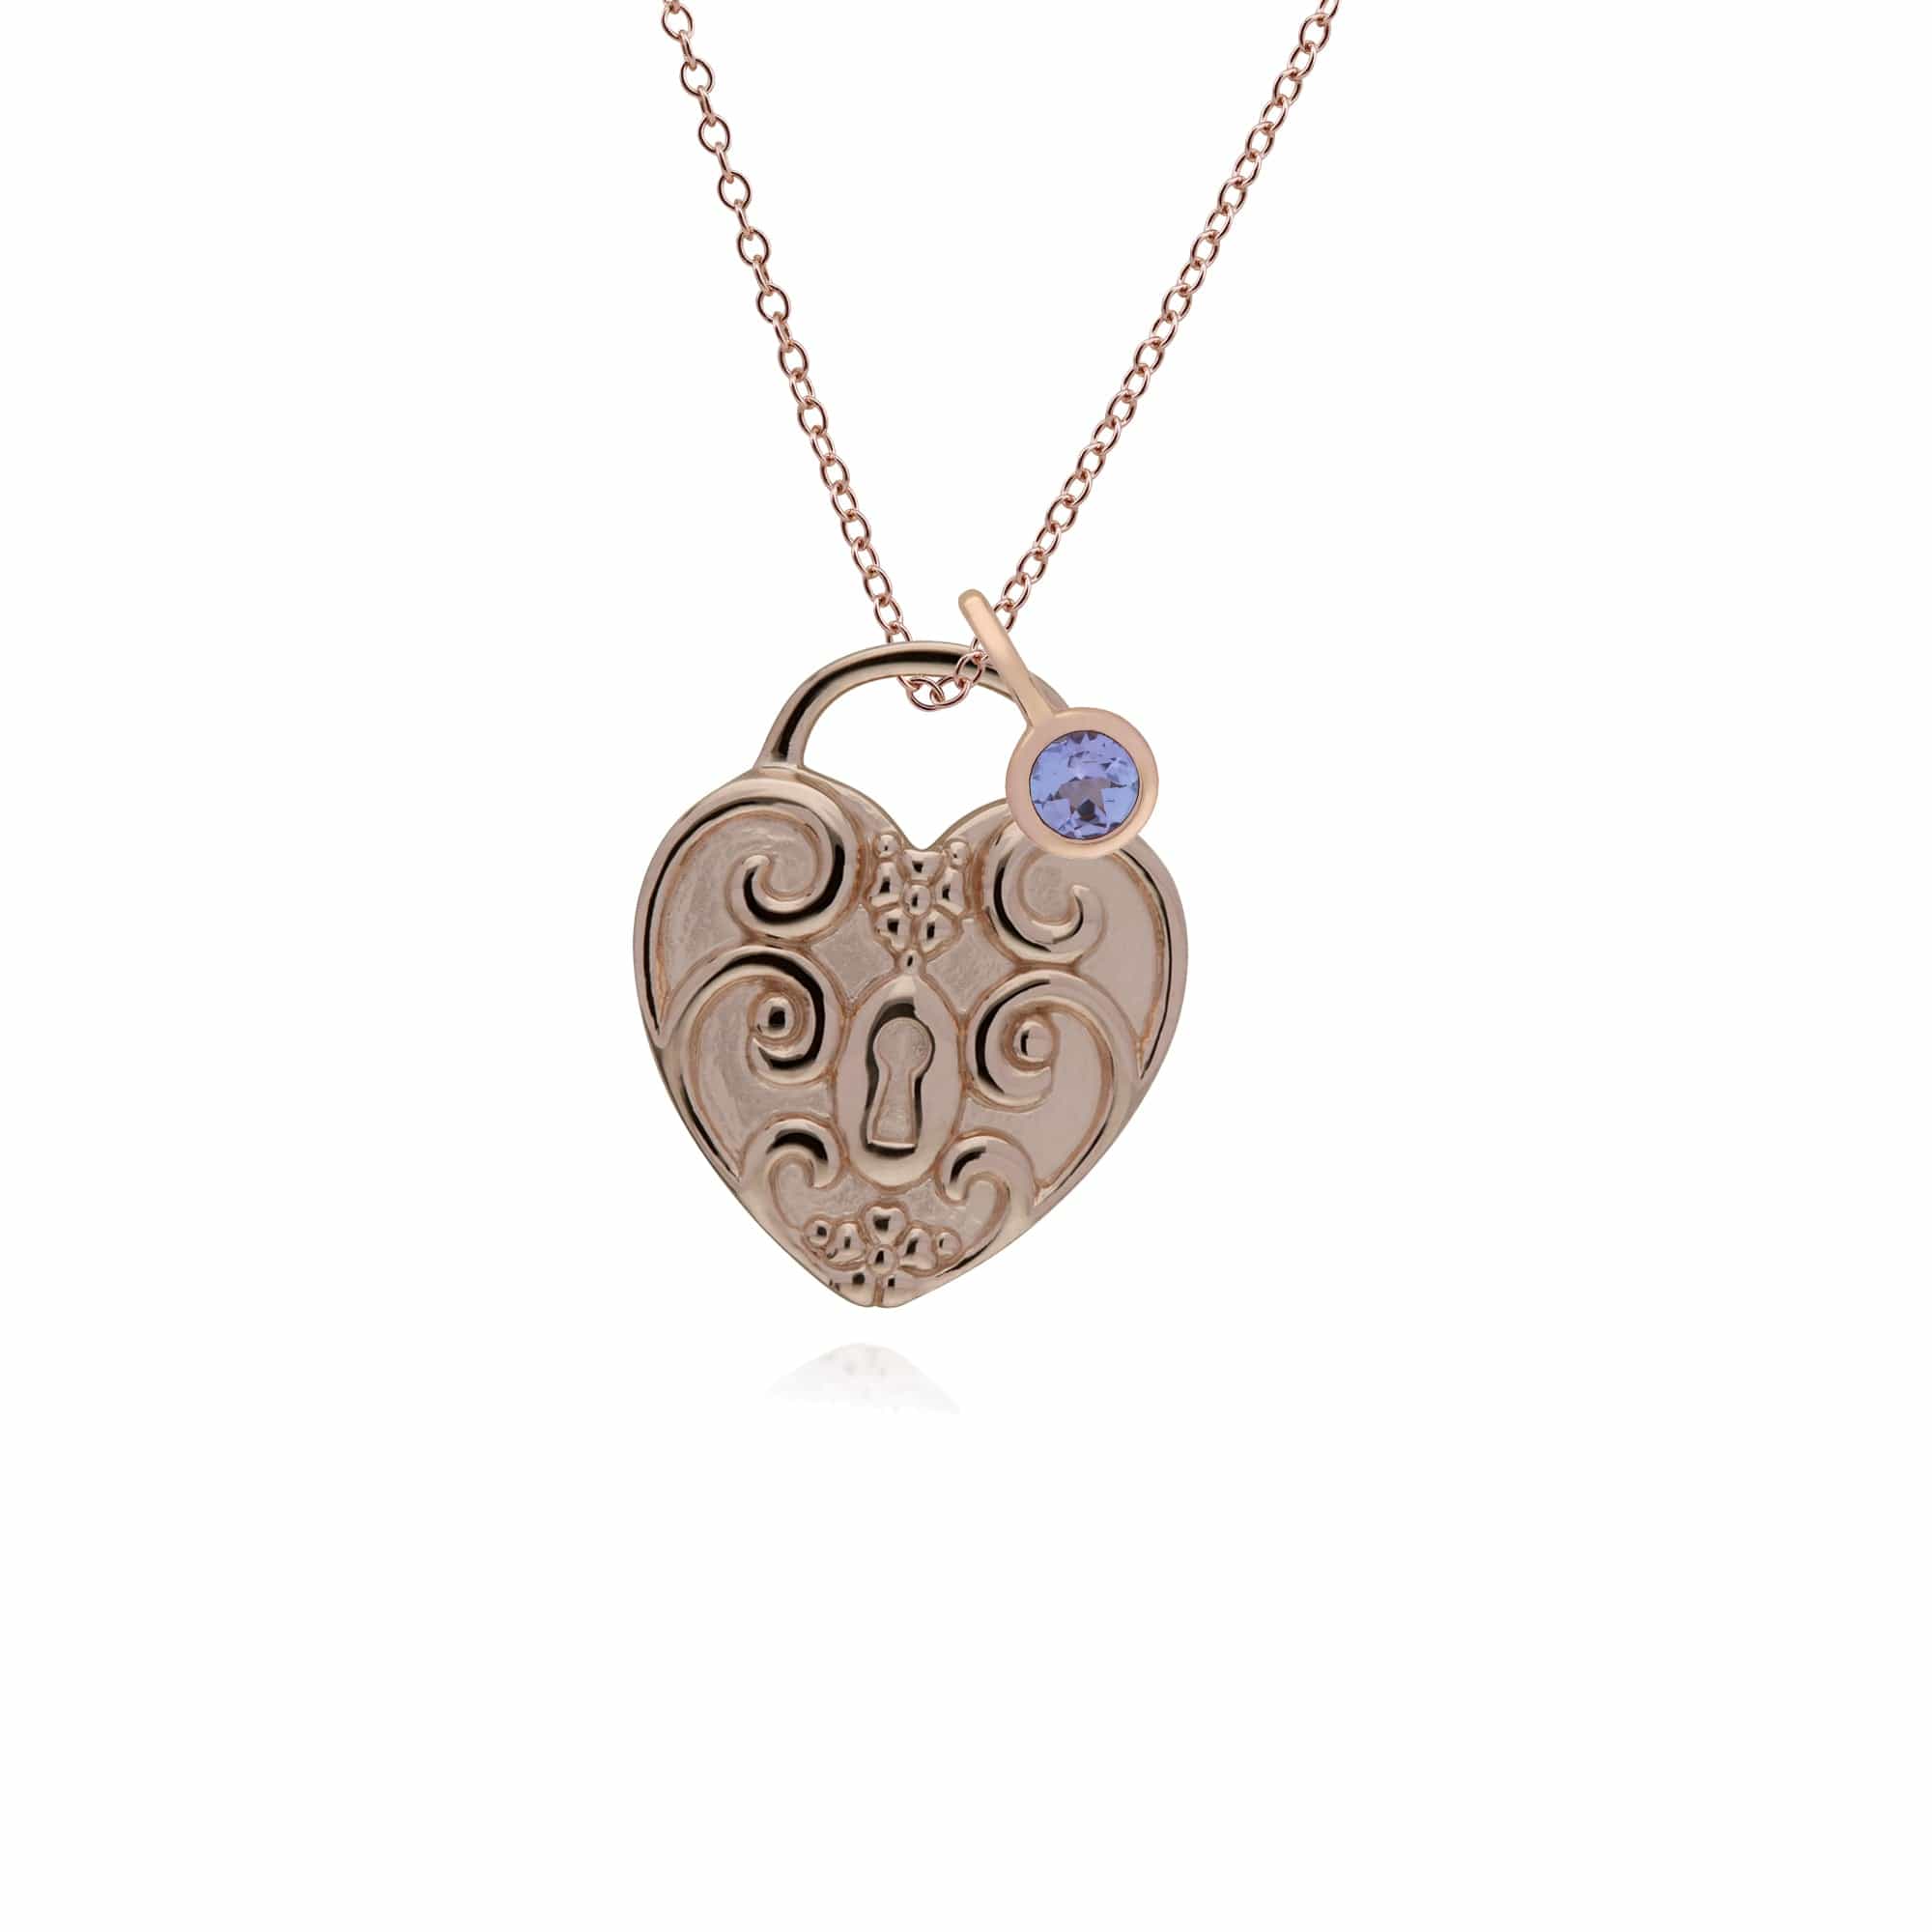 270P027306925-270P026501925 Classic Swirl Heart Lock Pendant & Tanzanite Charm in Rose Gold Plated 925 Sterling Silver 1